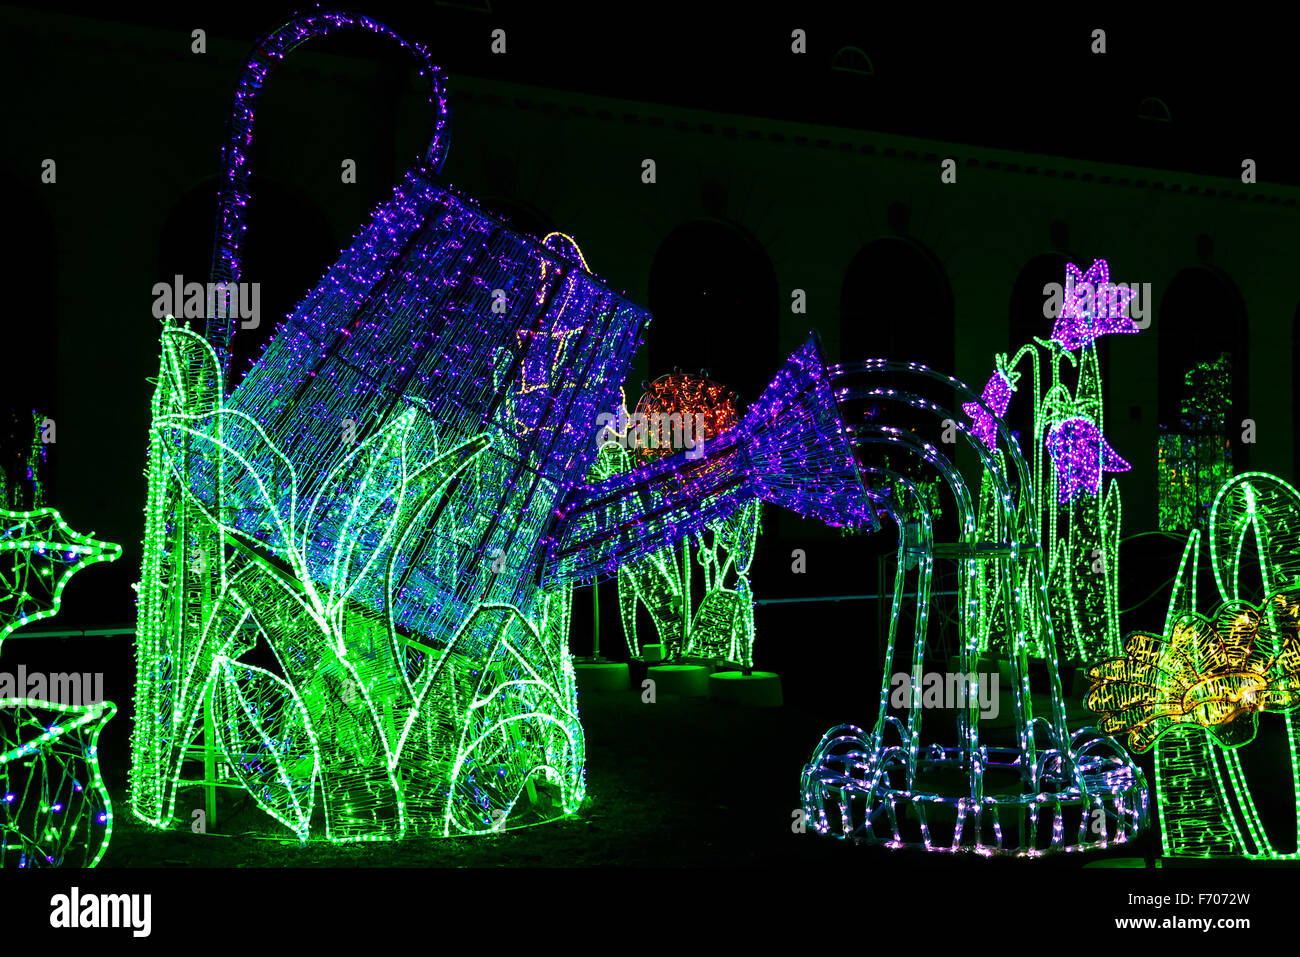 Construction of Watering Can Illuminated from Colorful Lamps in Garden of Lights Stock Photo